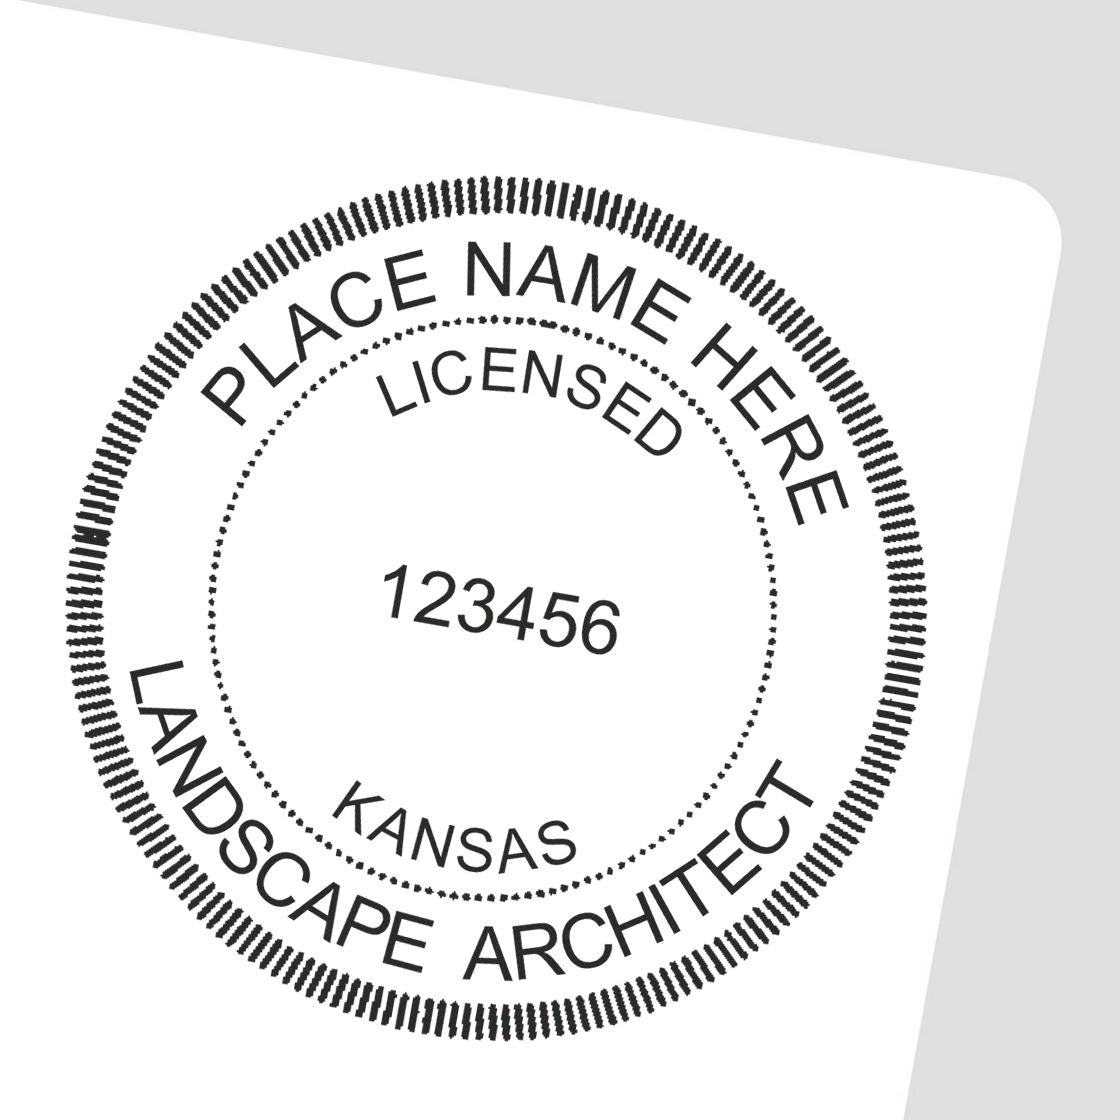 This paper is stamped with a sample imprint of the Slim Pre-Inked Kansas Landscape Architect Seal Stamp, signifying its quality and reliability.